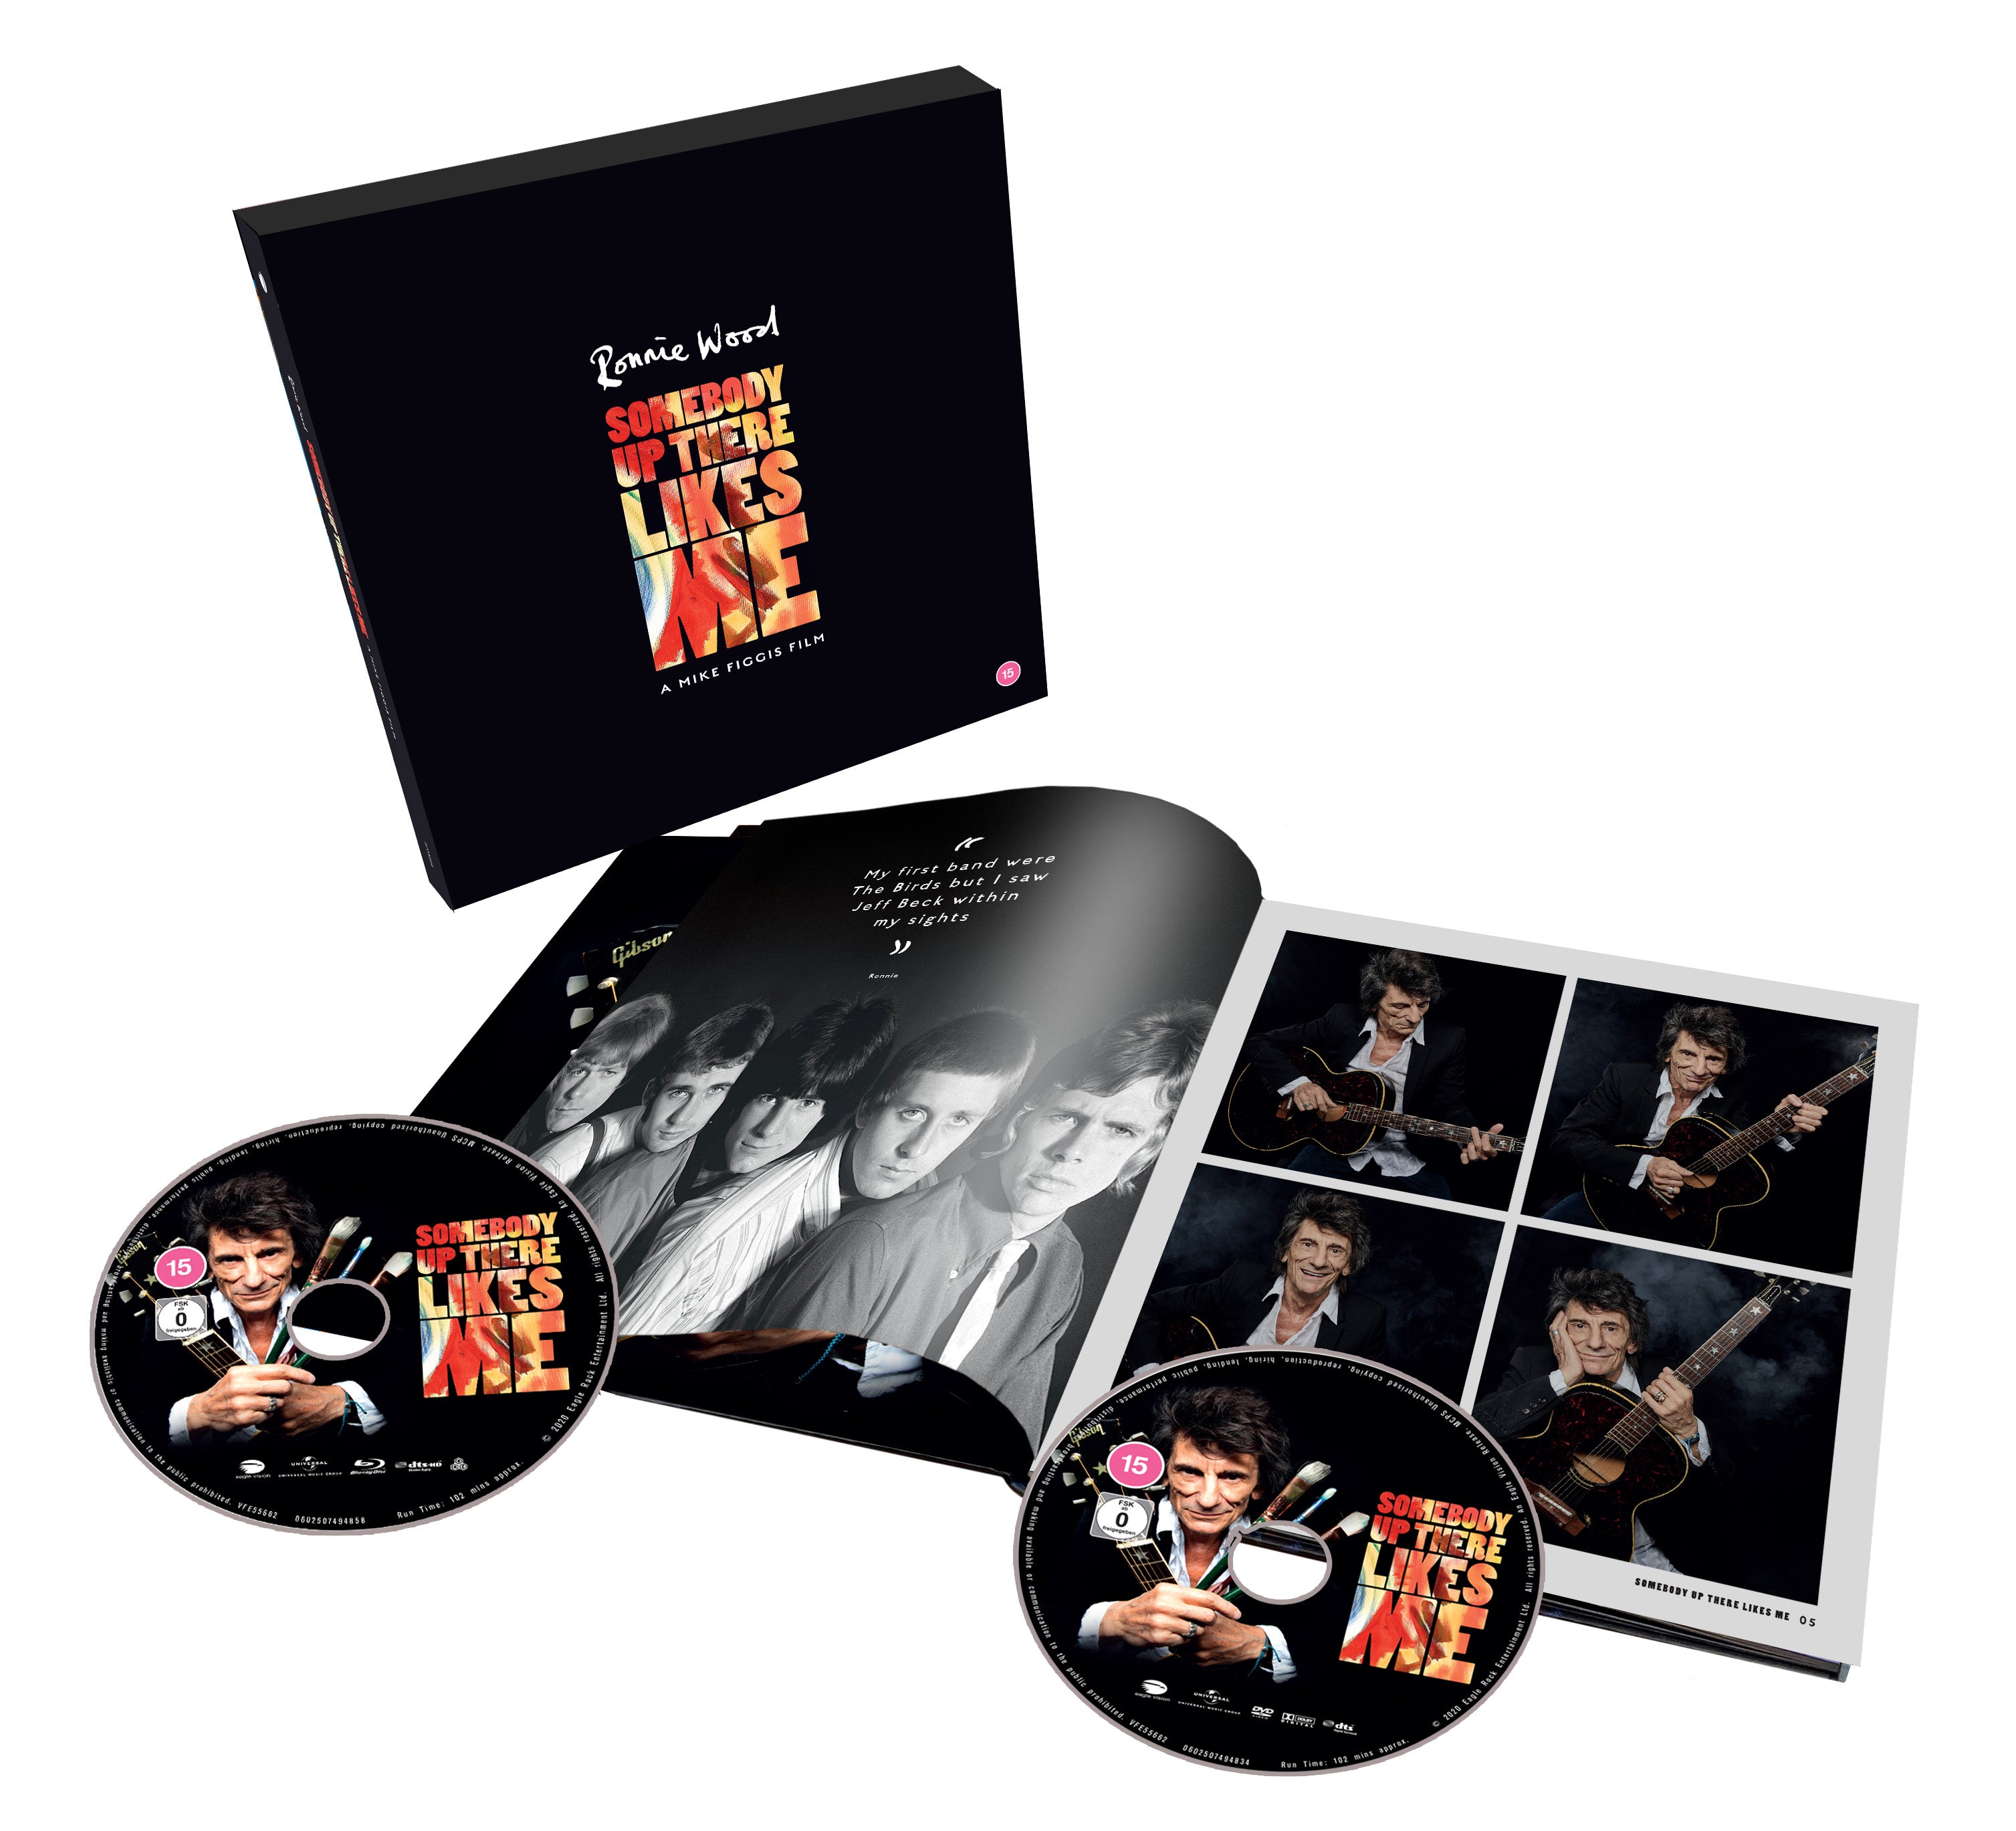 Ronnie Wood - Somebody Up There Likes Me: Deluxe Hardback Book, Blu-Ray + DVD